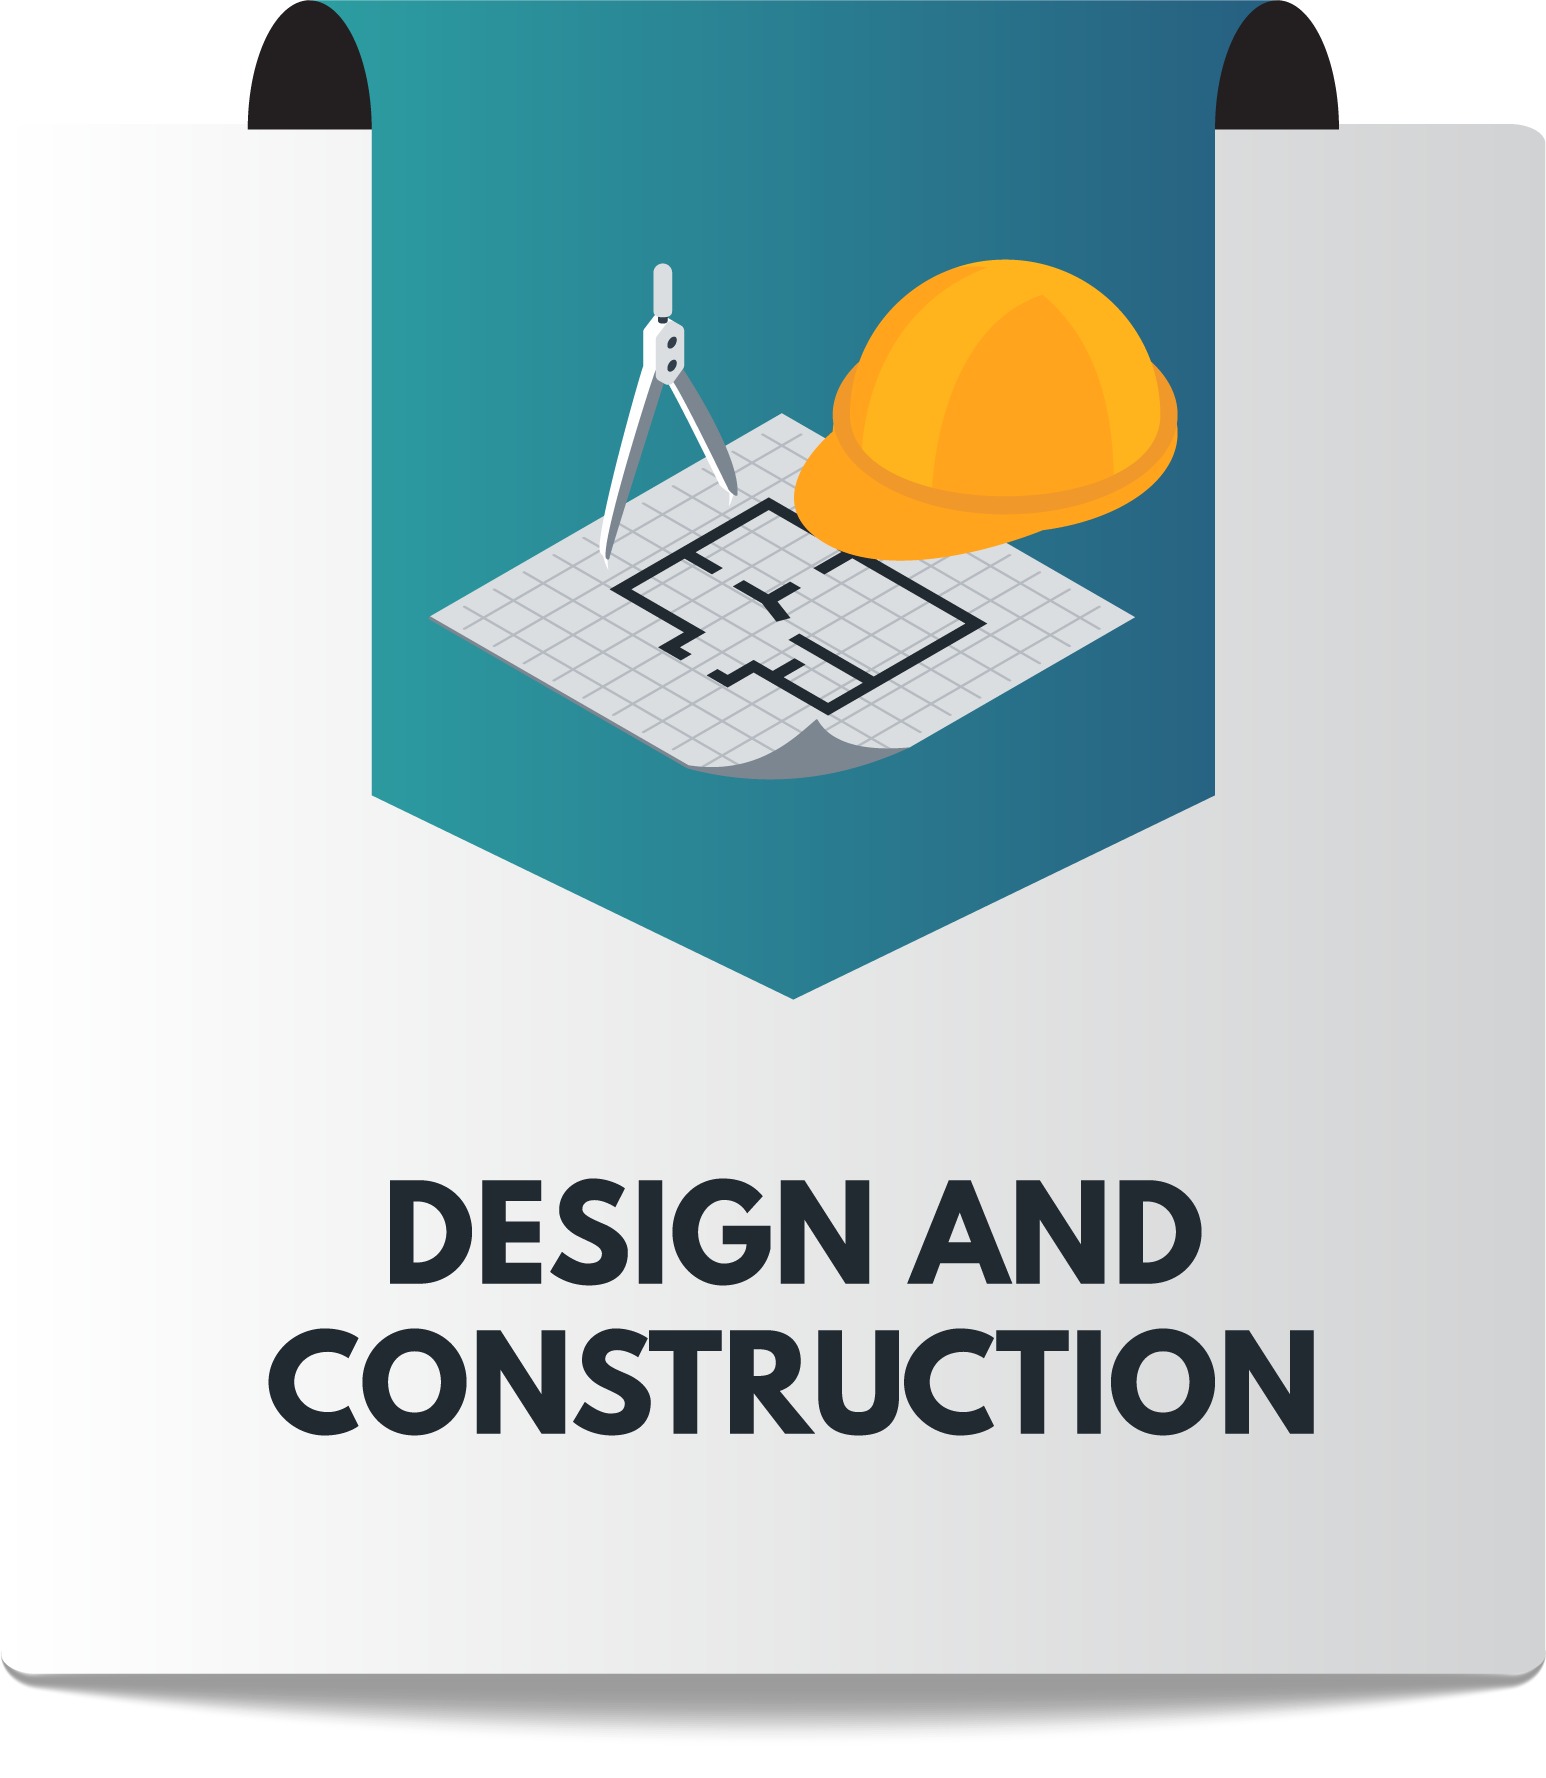 Click here to visit the Division of Construction website.